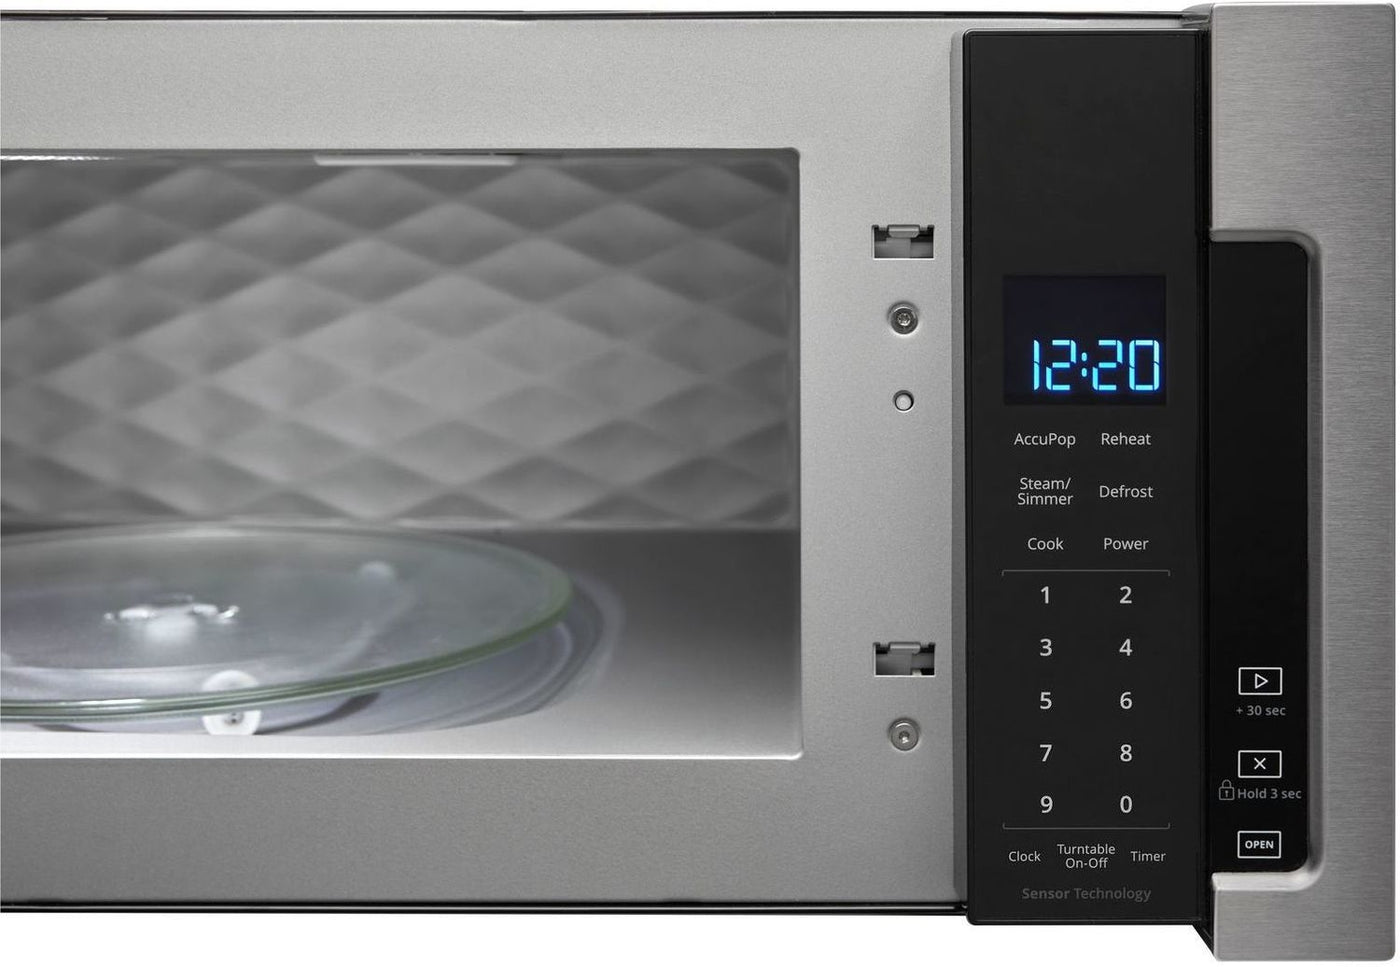 Whirlpool Stainless Steel Over-the-Range Microwave and Hood Combination (1.1 Cu. Ft.) - YWML75011HZ